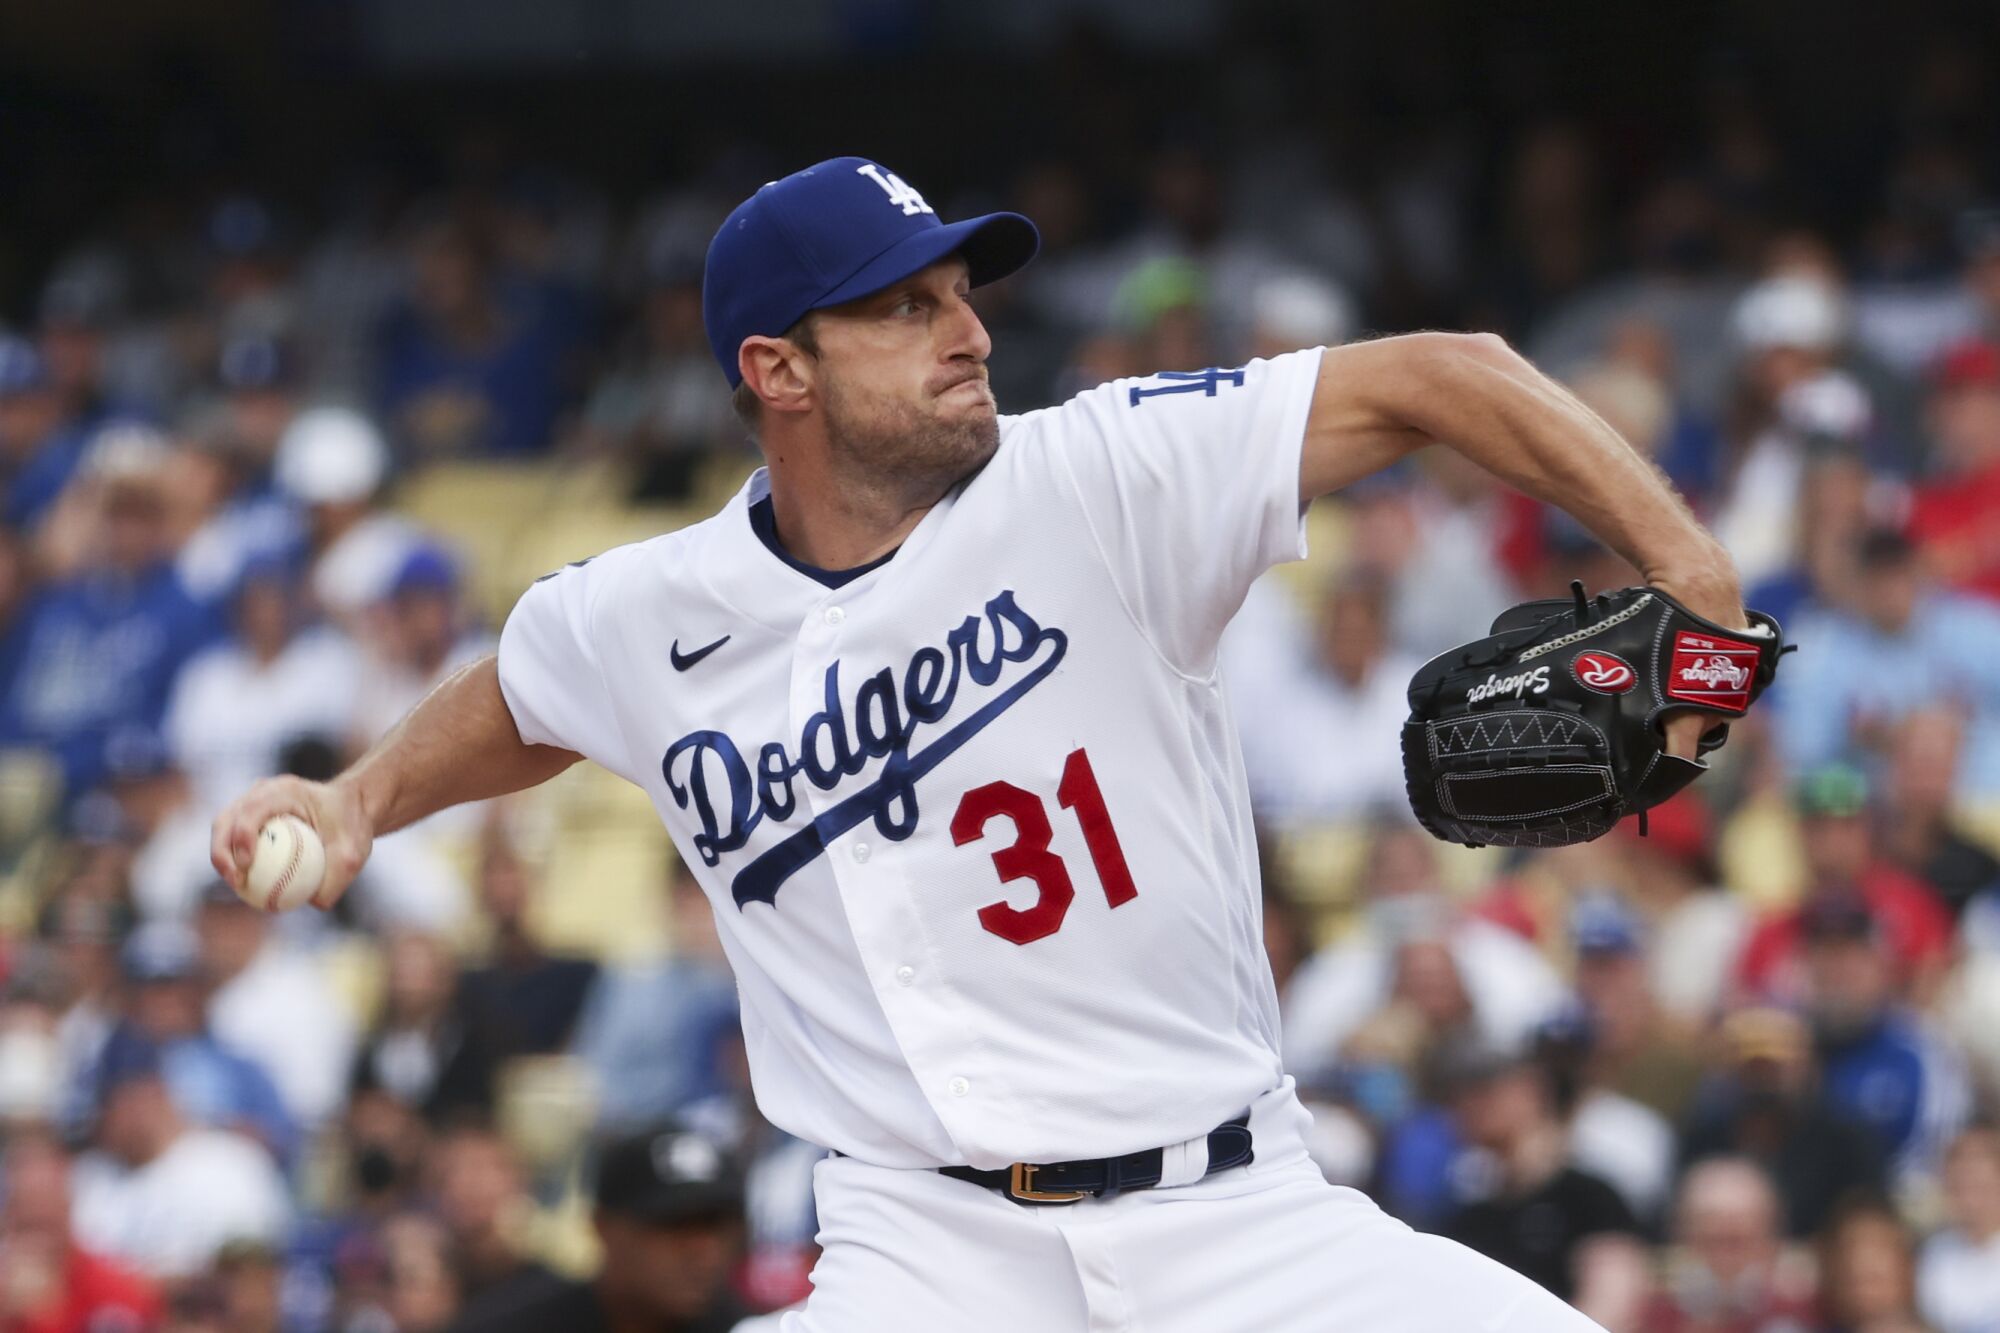 Los Angeles Dodgers starting pitcher Max Scherzer delivers a pitch during the first inning against the St. Louis Cardinals